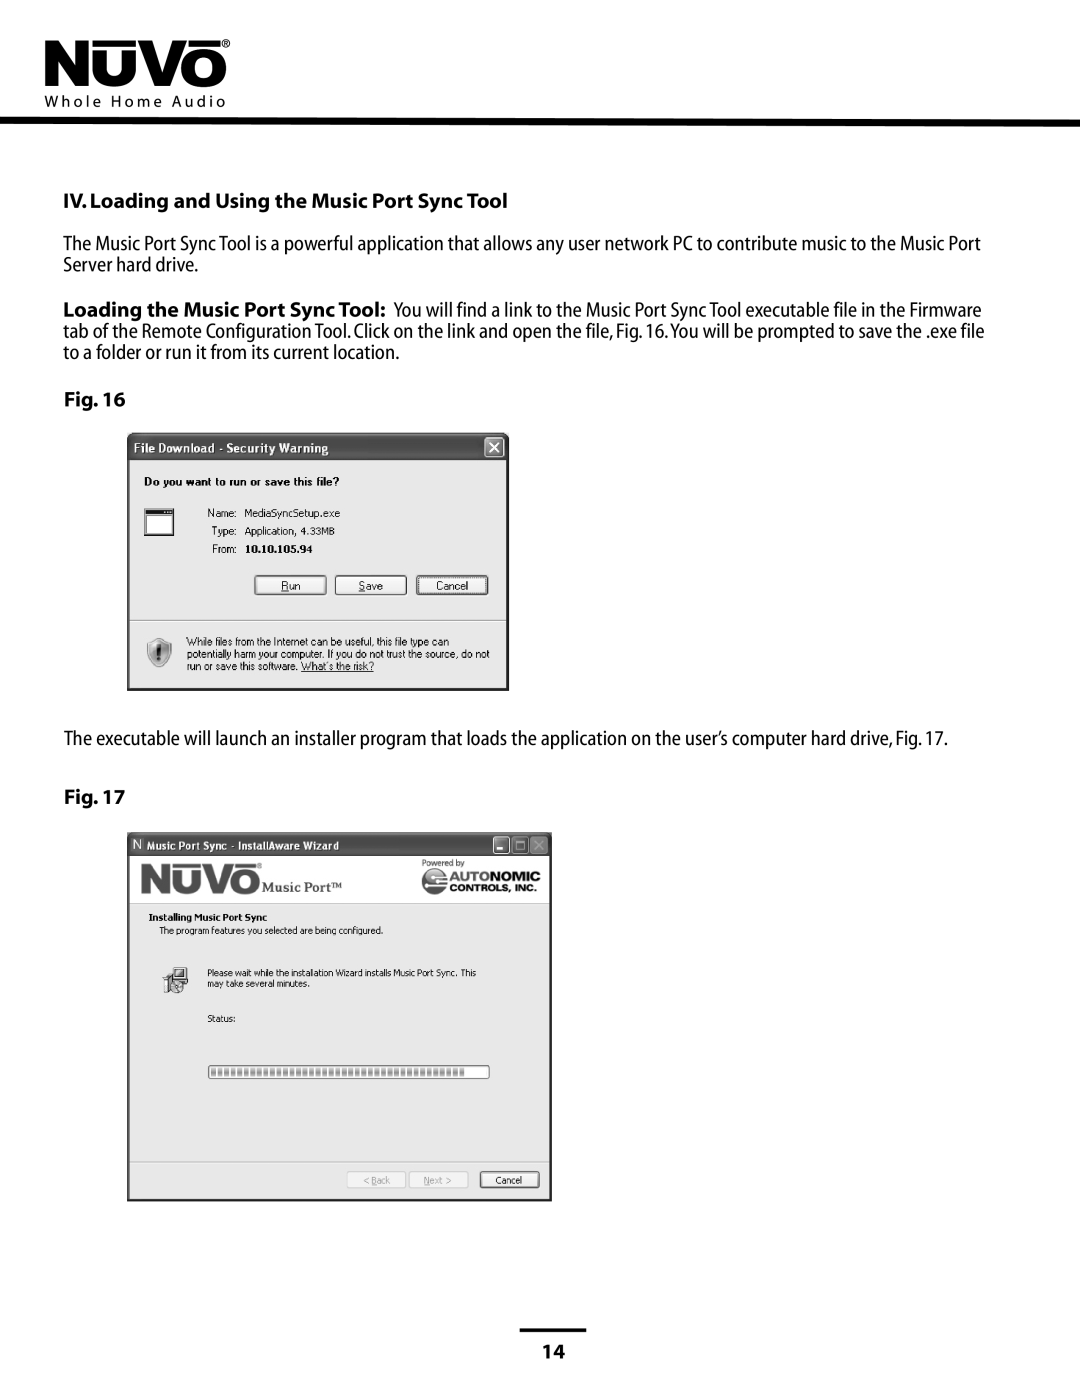 Nuvo NV-MPS4 manual IV. Loading and Using the Music Port Sync Tool 